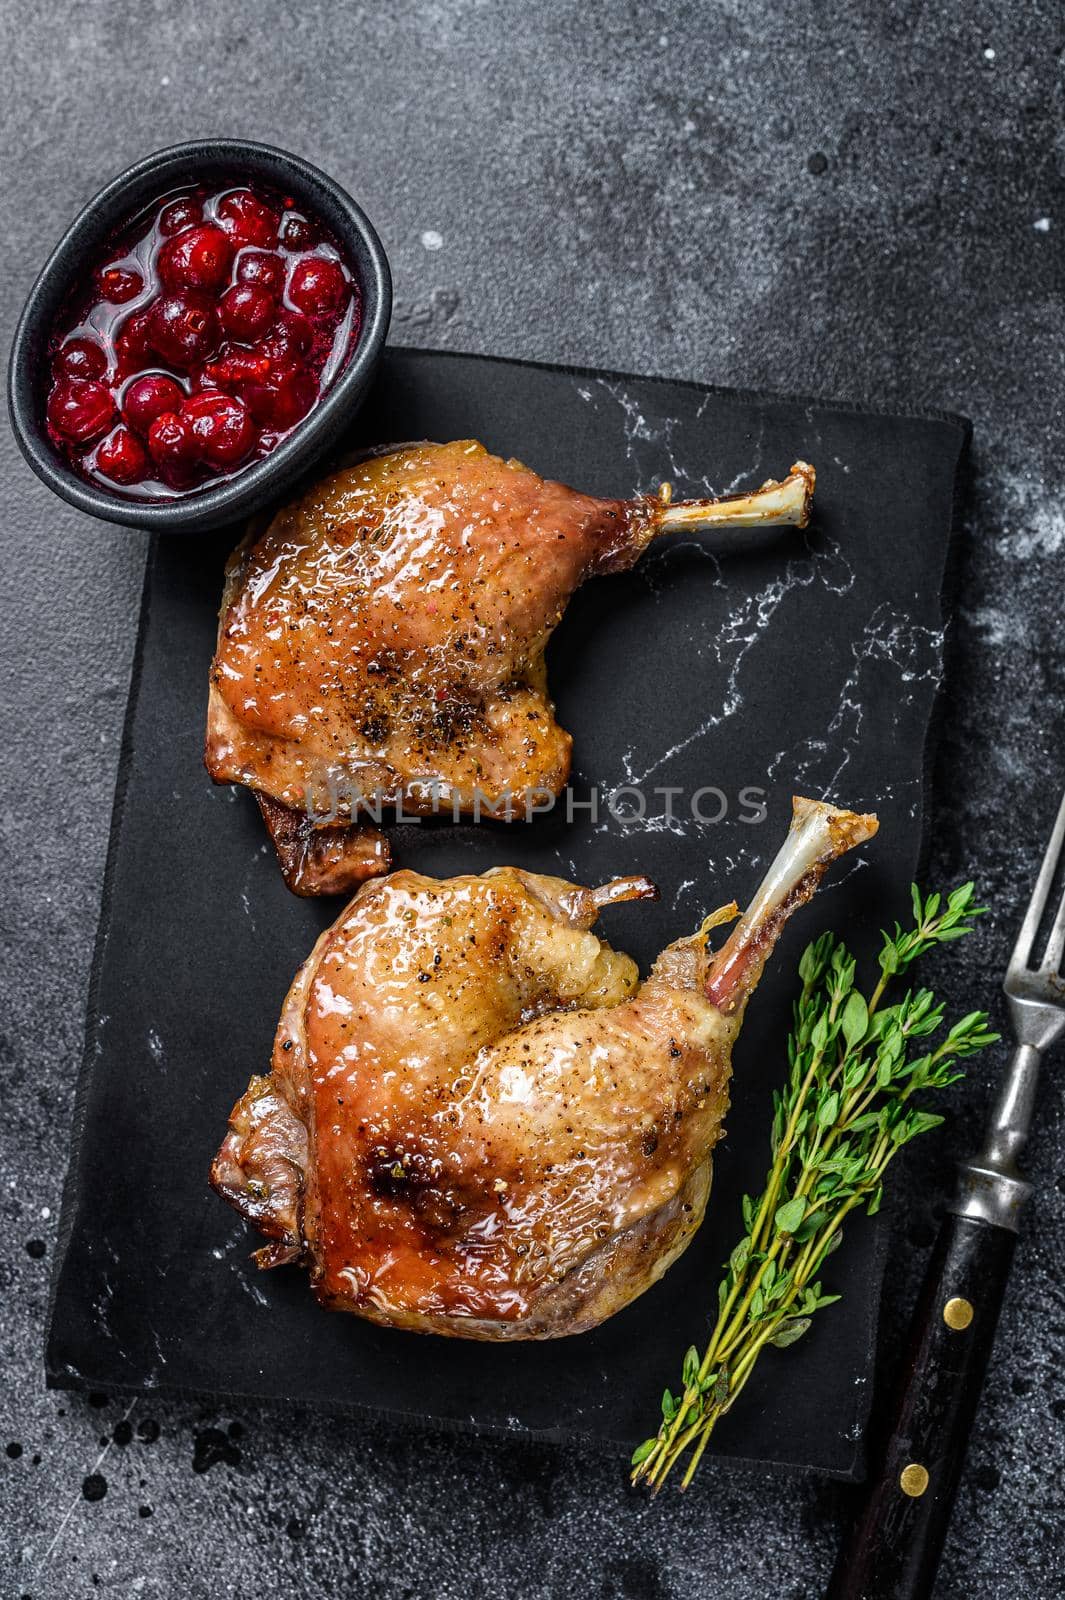 Roasted duck leg confit with cranberrie sauce. Black background. top view.